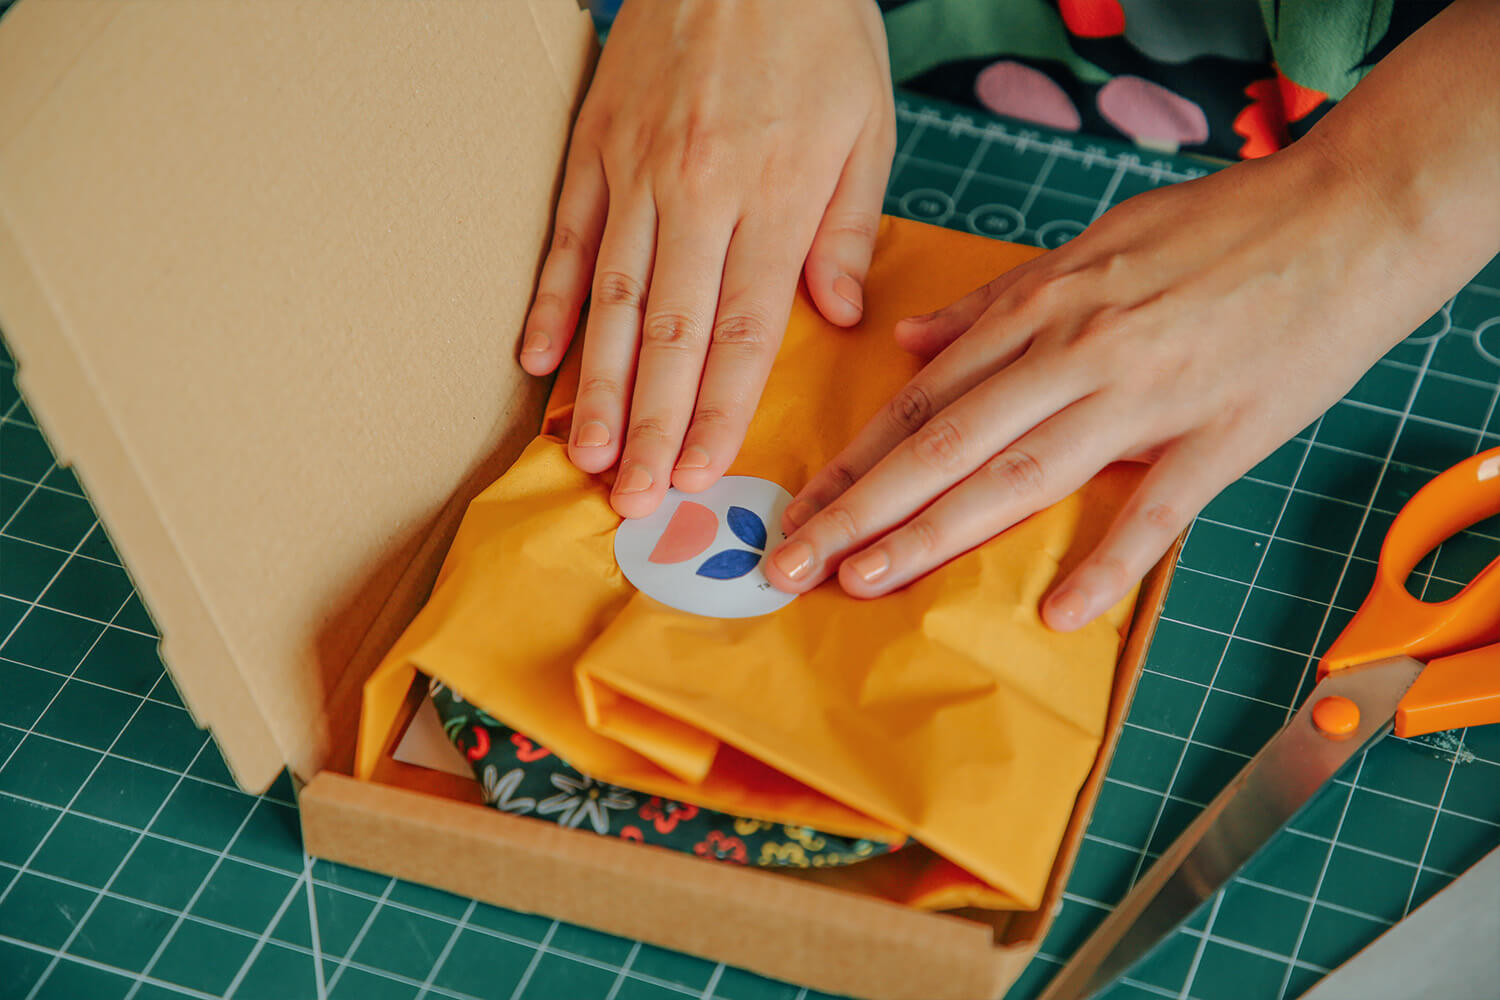 Illustrator and maker Taaryn Brench packing with colourful abstract tissue and packaging